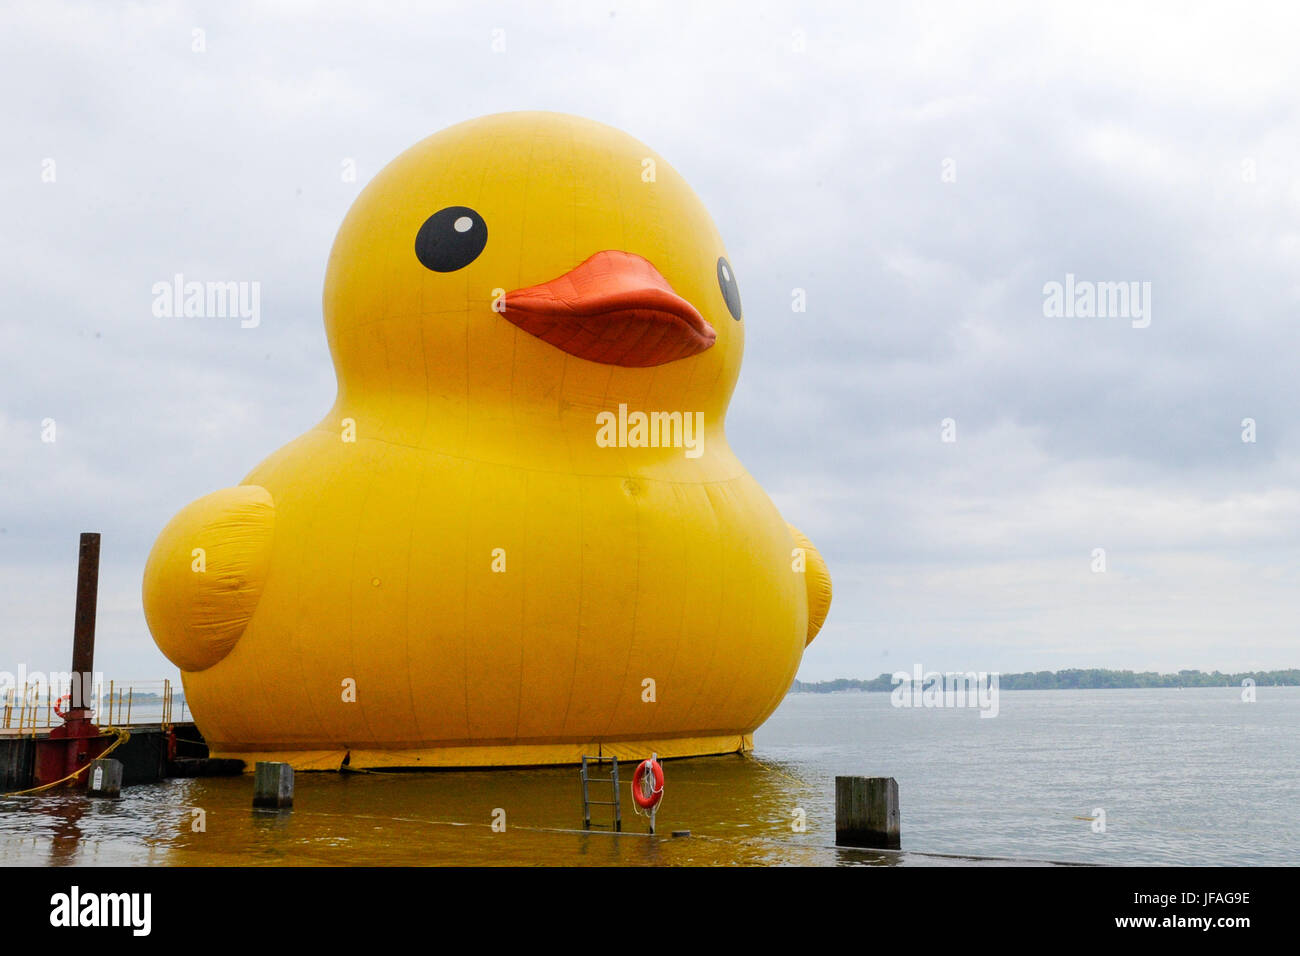 Toronto, Canada. 30th June 2017. The World's largest Rubber Duck make it's Canadian debut on Toronto's waterfront to celebrate Canada 150th Birthday at the Redpath Waterfront Festival from July 1 to July 3, 2017. Dominic Chan/EXimages/Alamy Live News Stock Photo